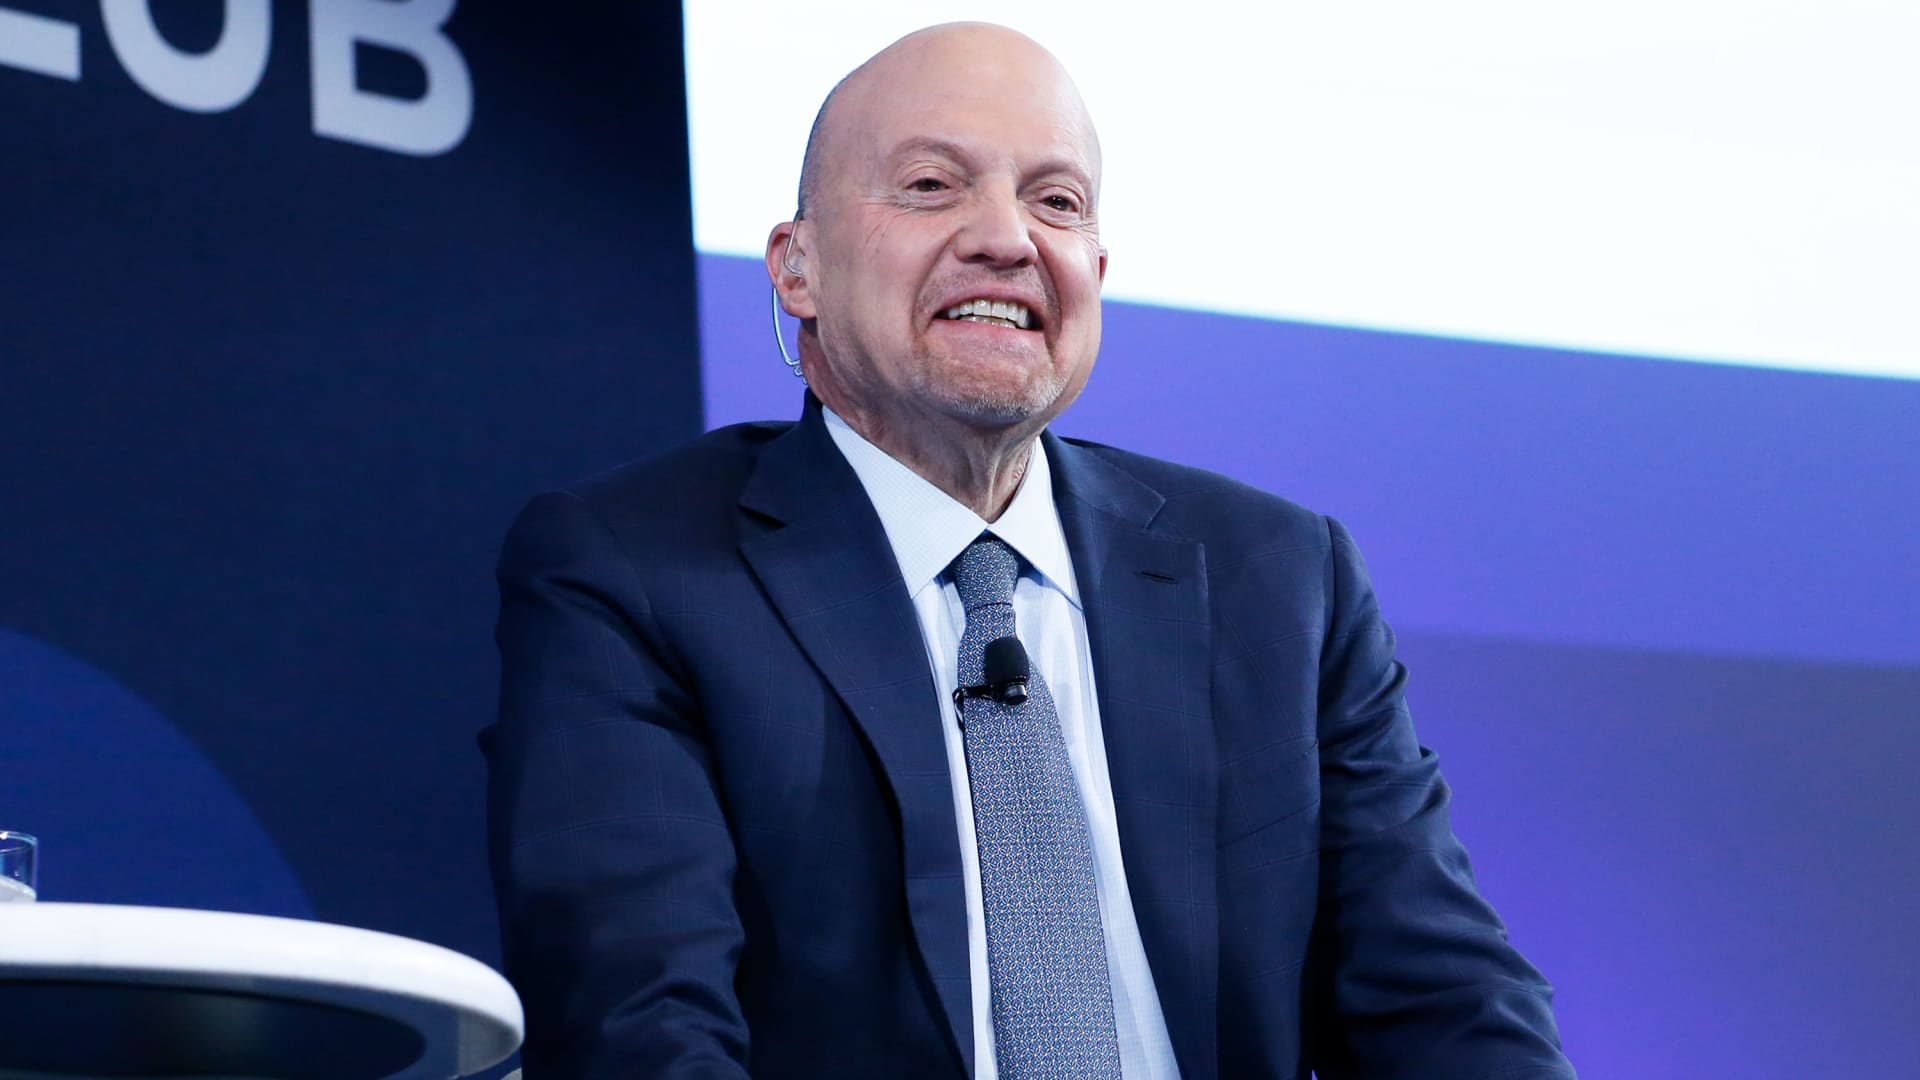 Club meeting recap: Jim Cramer says ‘buy Ford, don’t sell it,’ while also touting Caterpillar Auto Recent